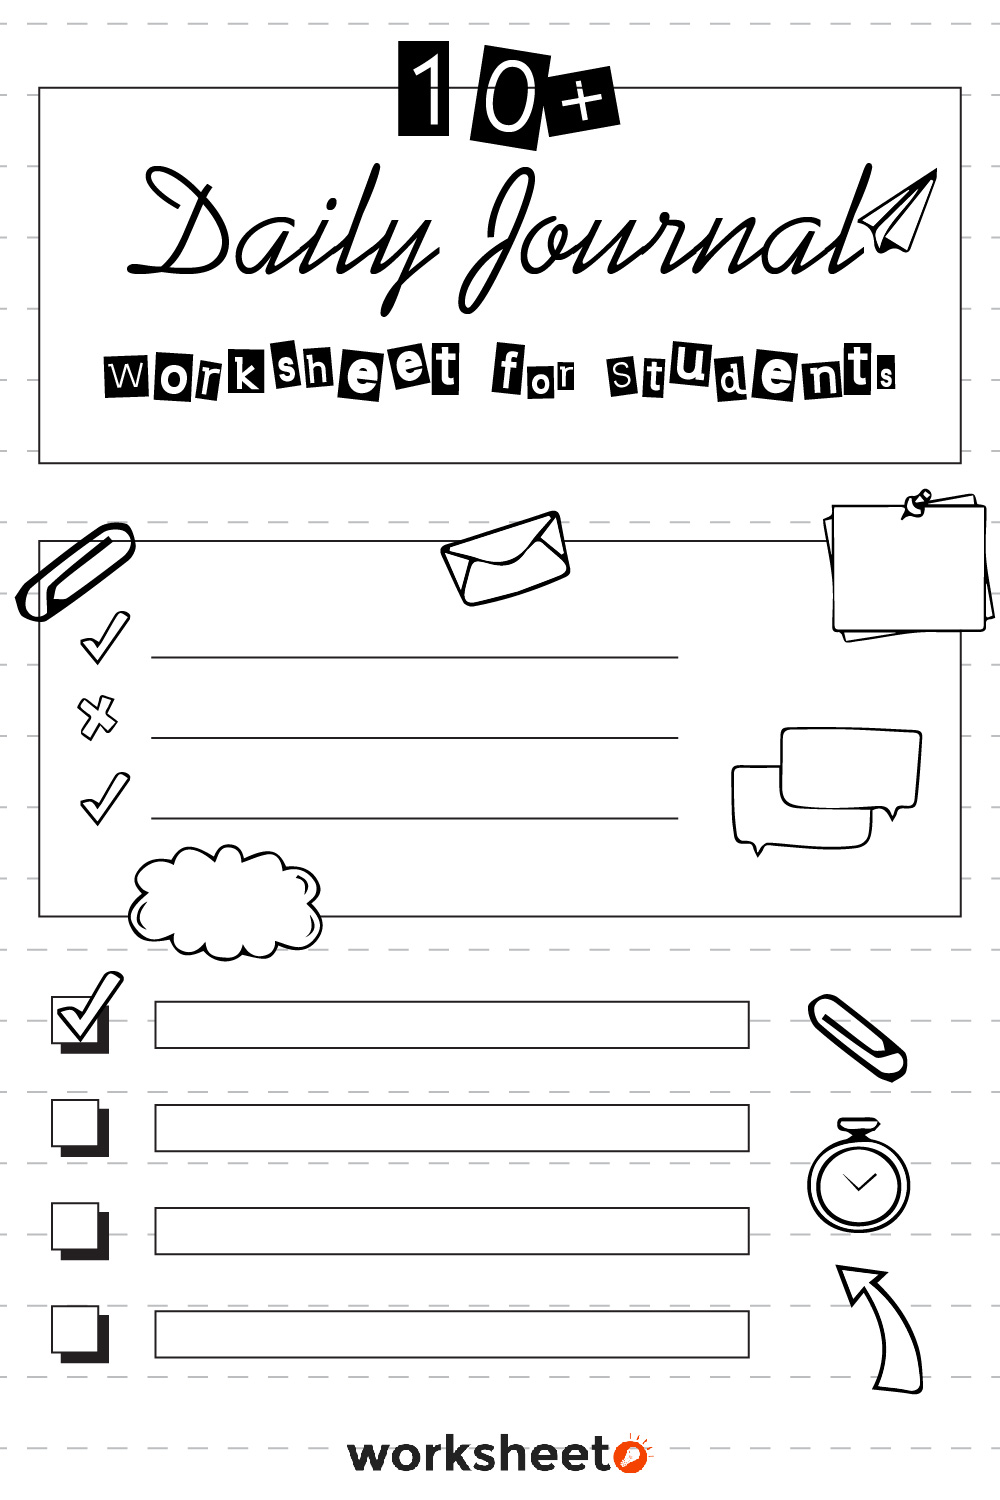 18 Images of Daily Journal Worksheet For Students